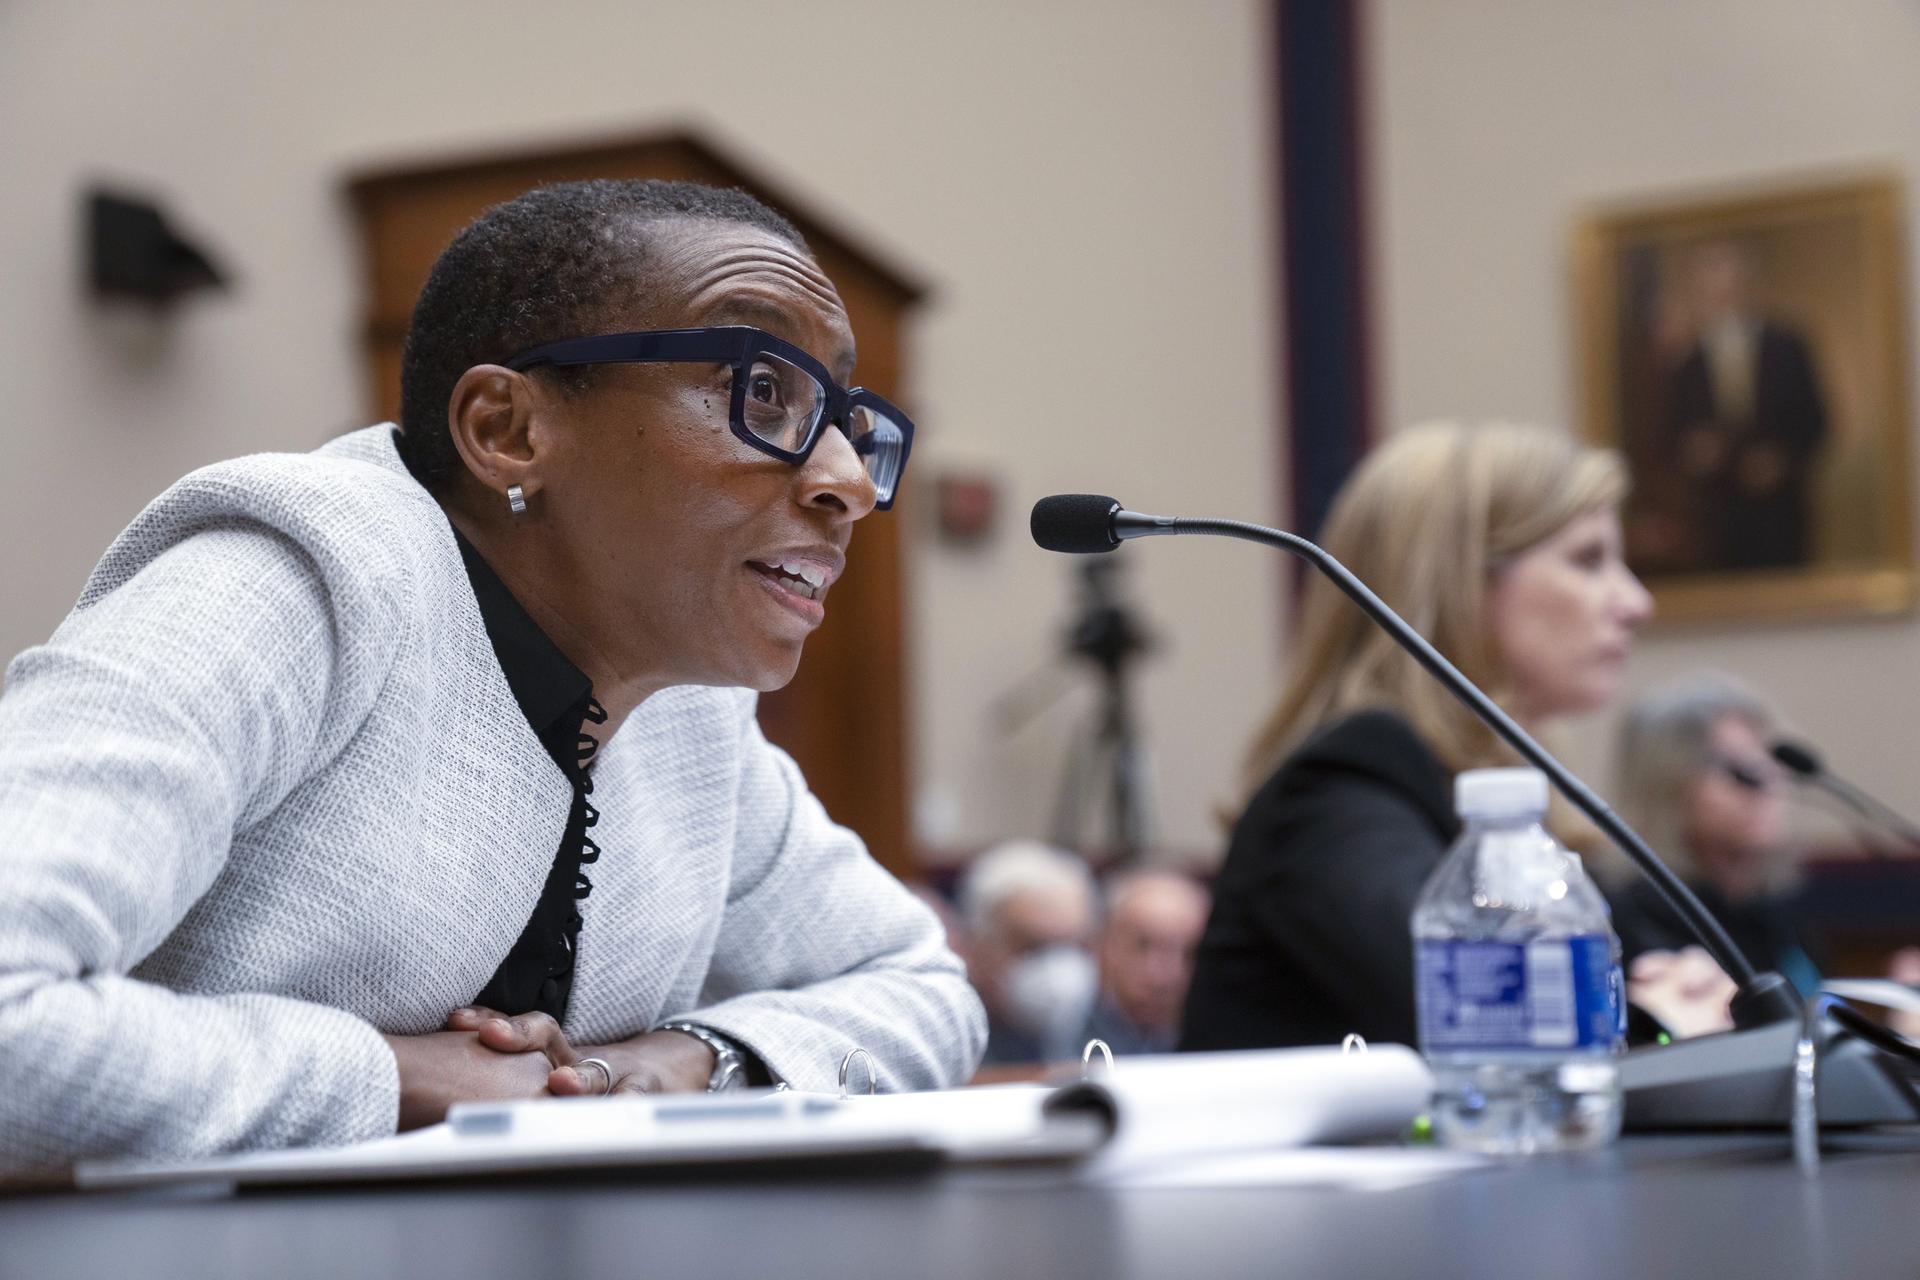 A Black woman wearing glasses and a gray sweater speaking into a microphone in a courtroom